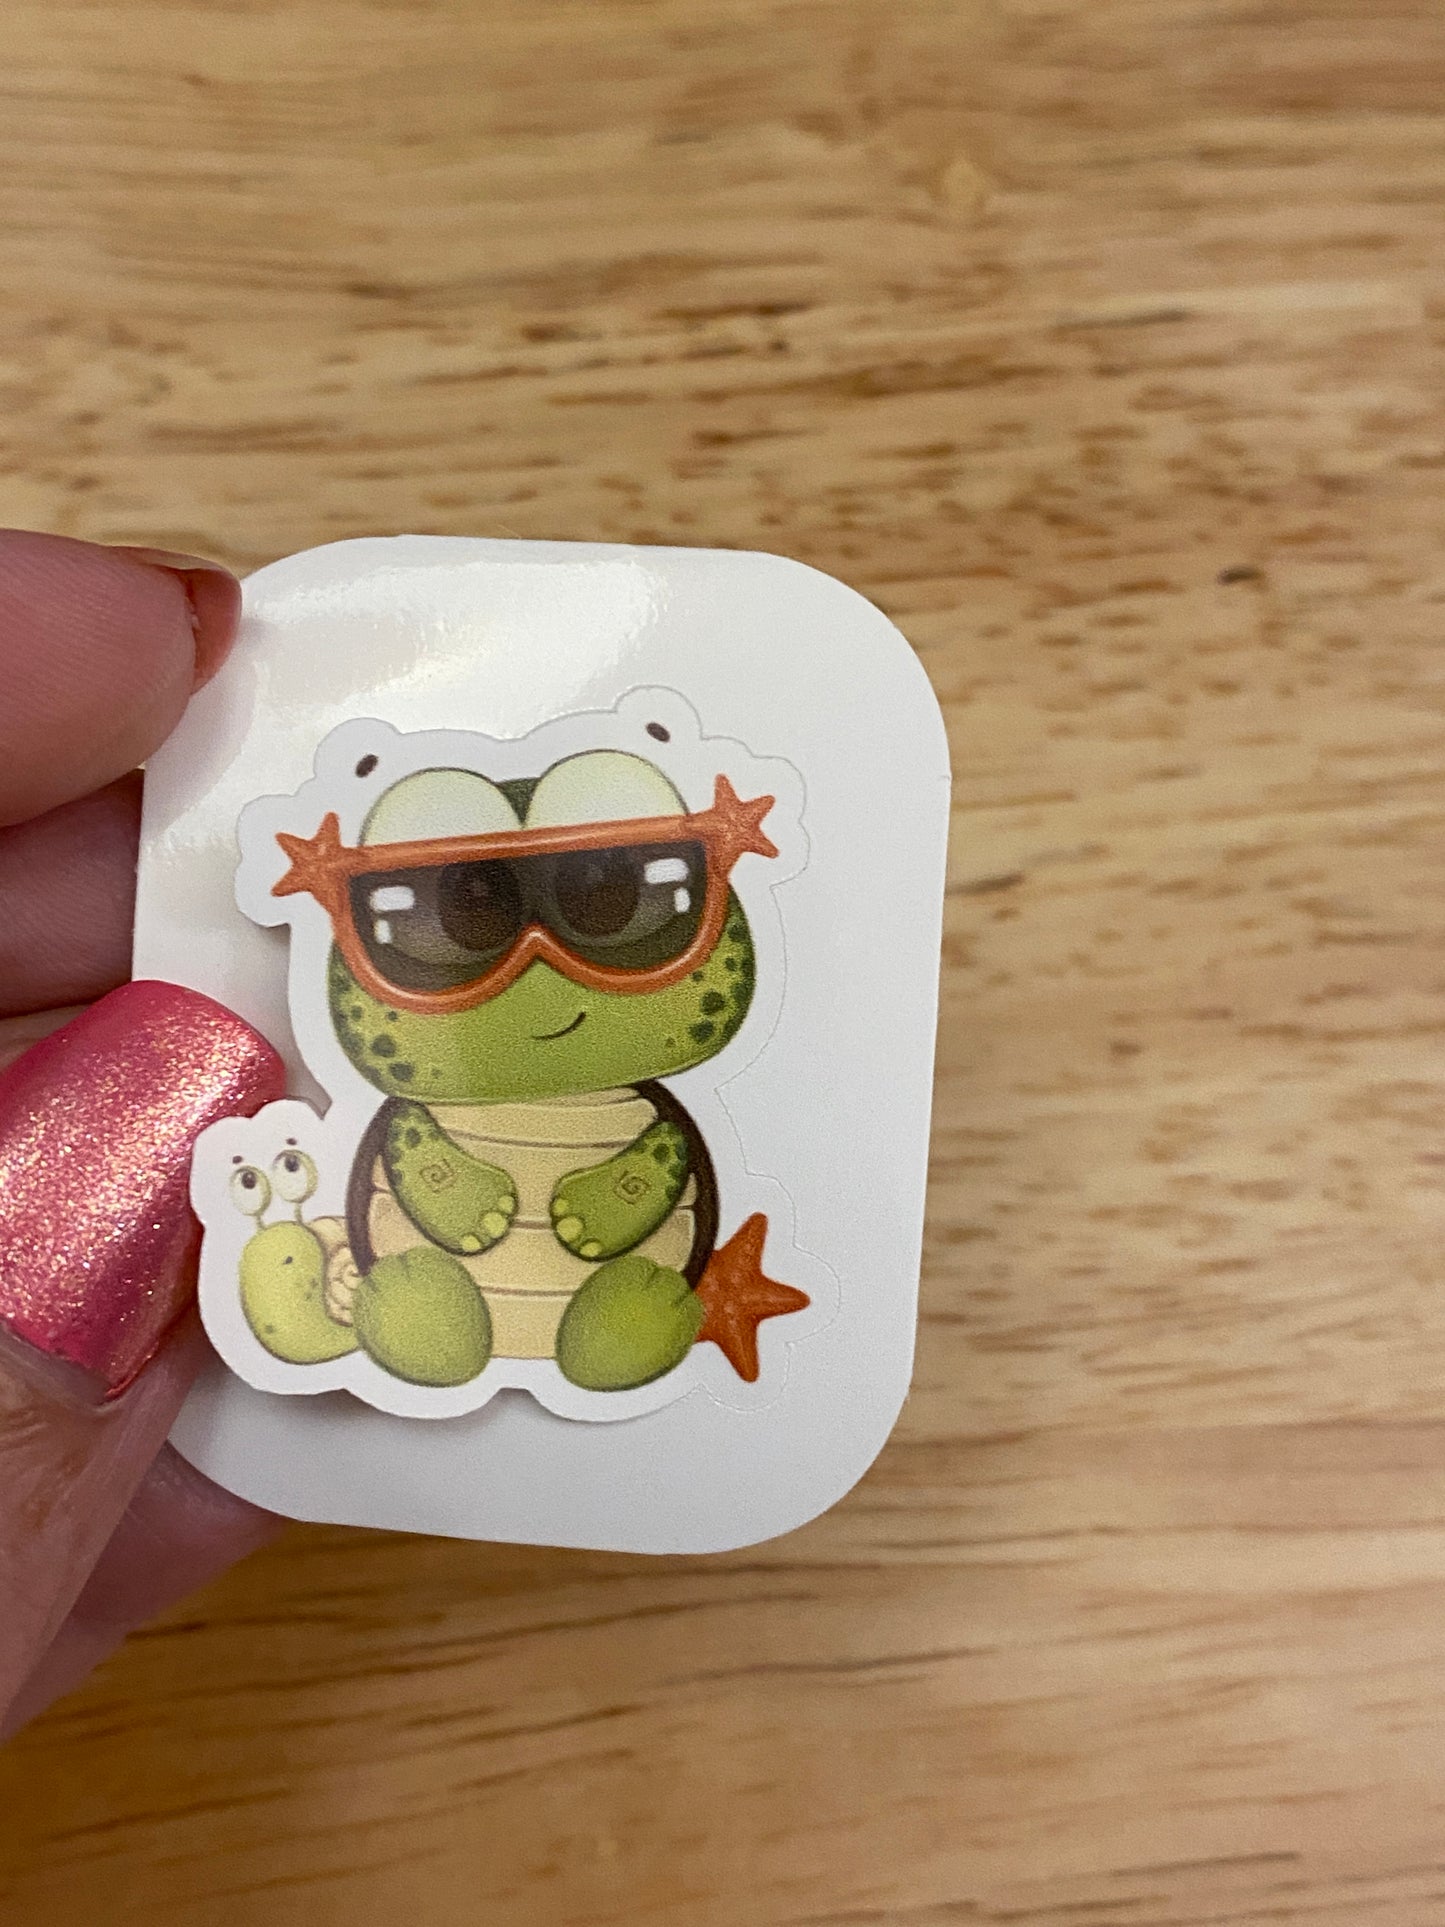 Cute Green Frog with Sunglasses Sticker